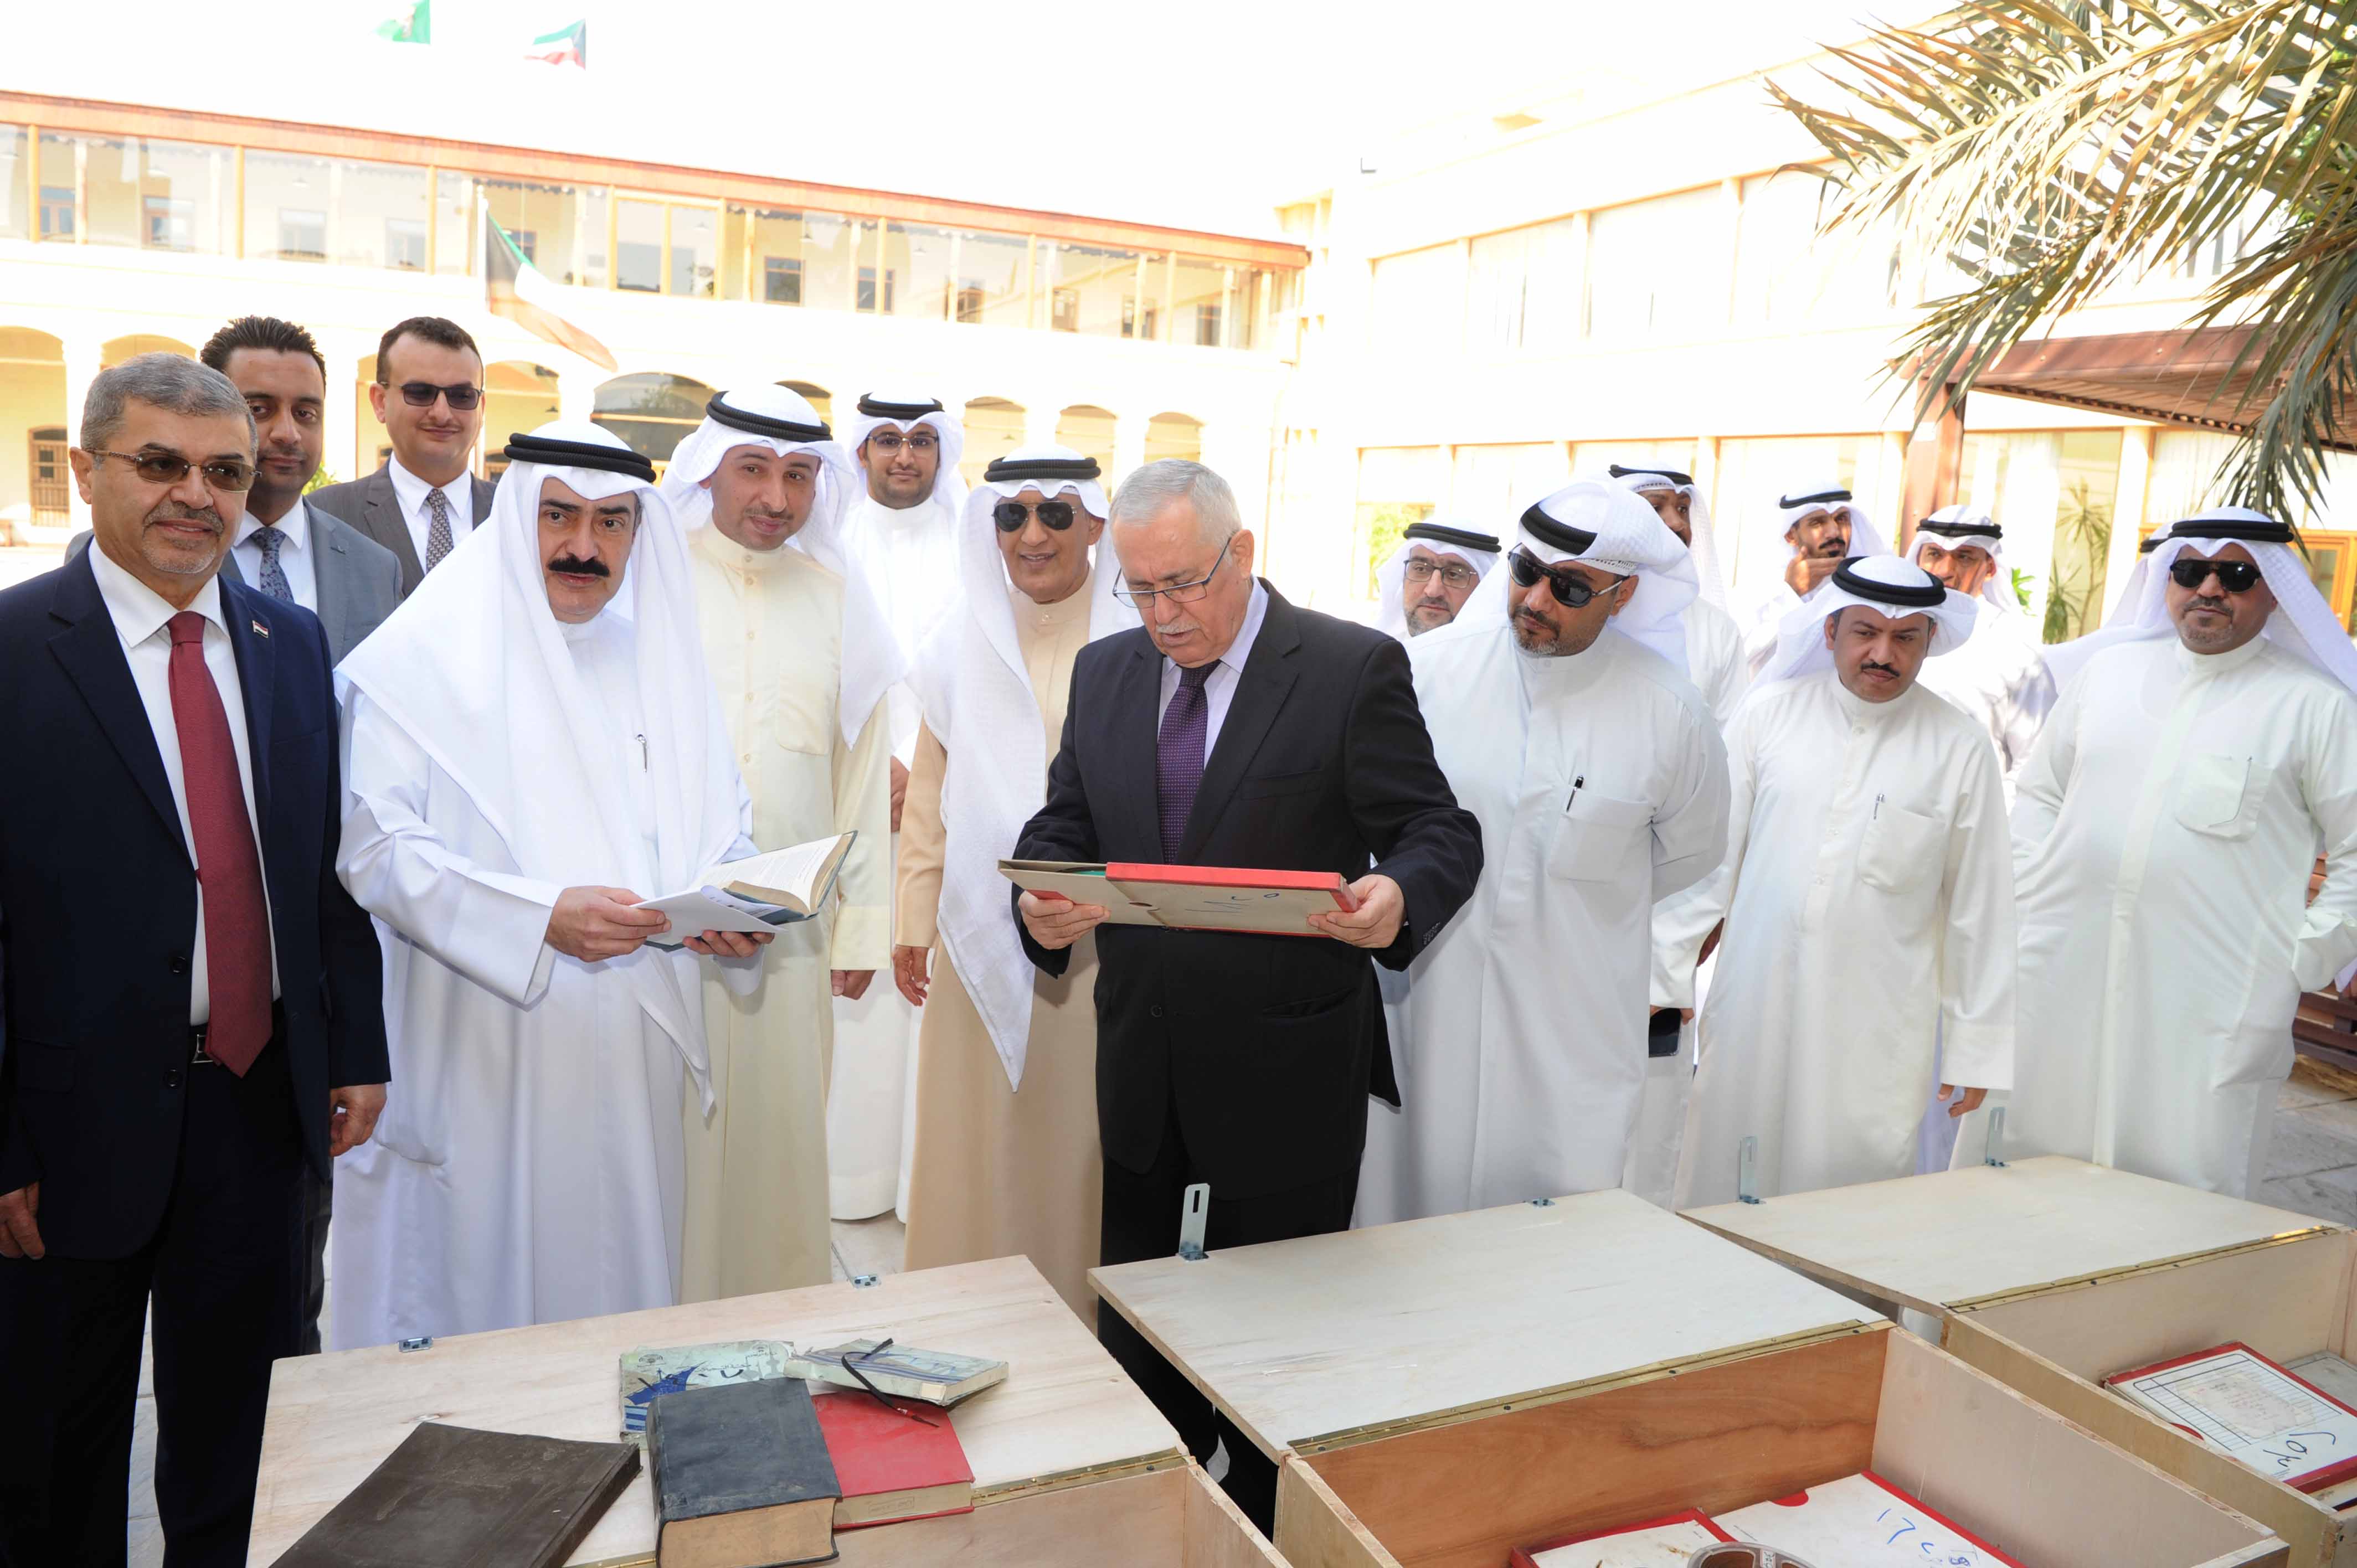 Handing back state TV and radio archives to Kuwait